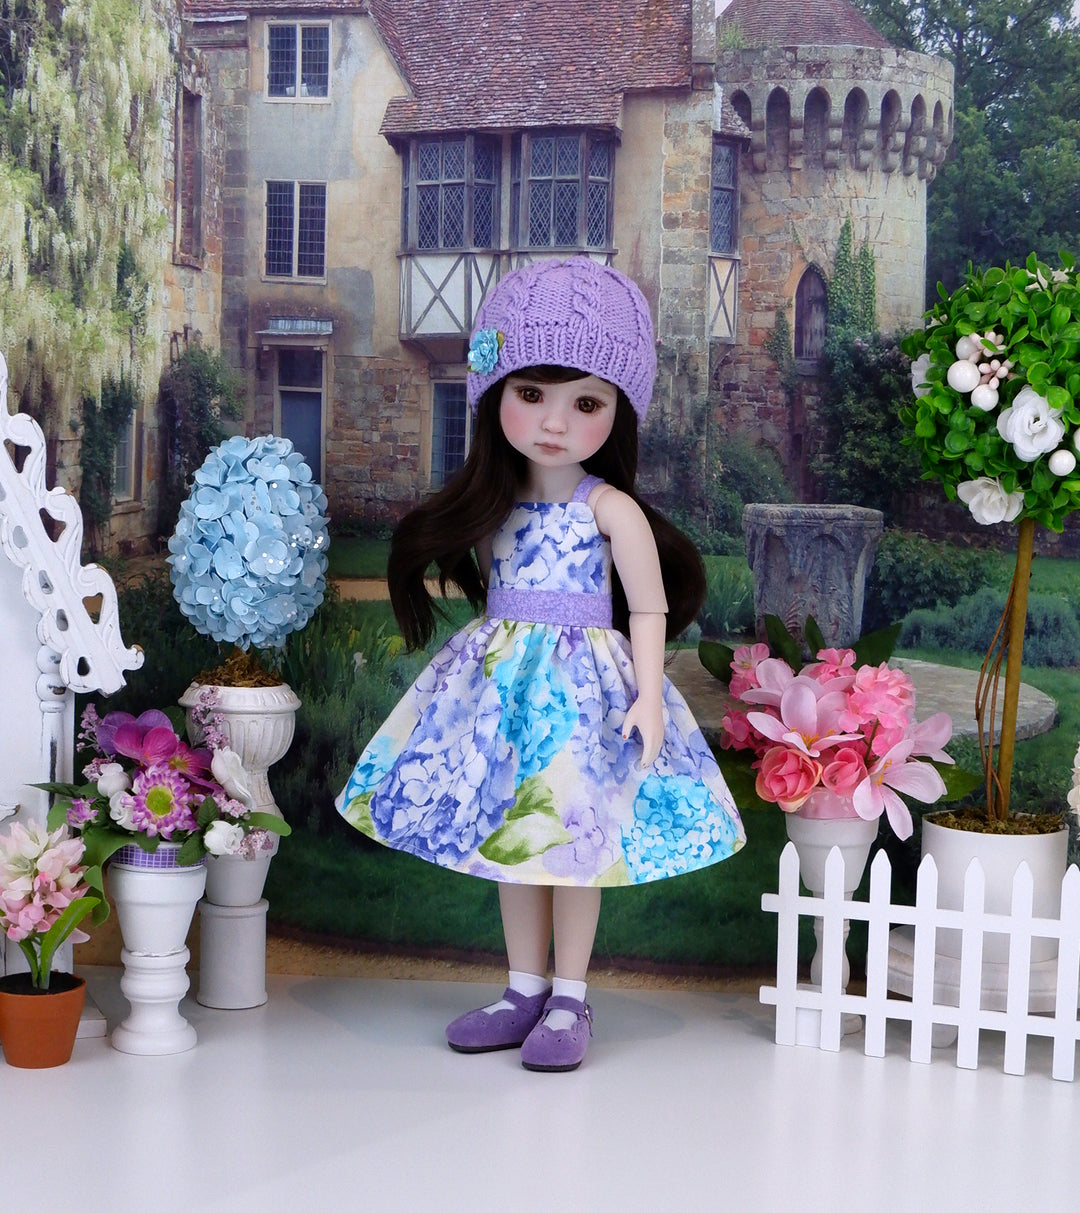 Pretty Hydrangea - dress & sweater set with shoes for Ruby Red Fashion Friends doll